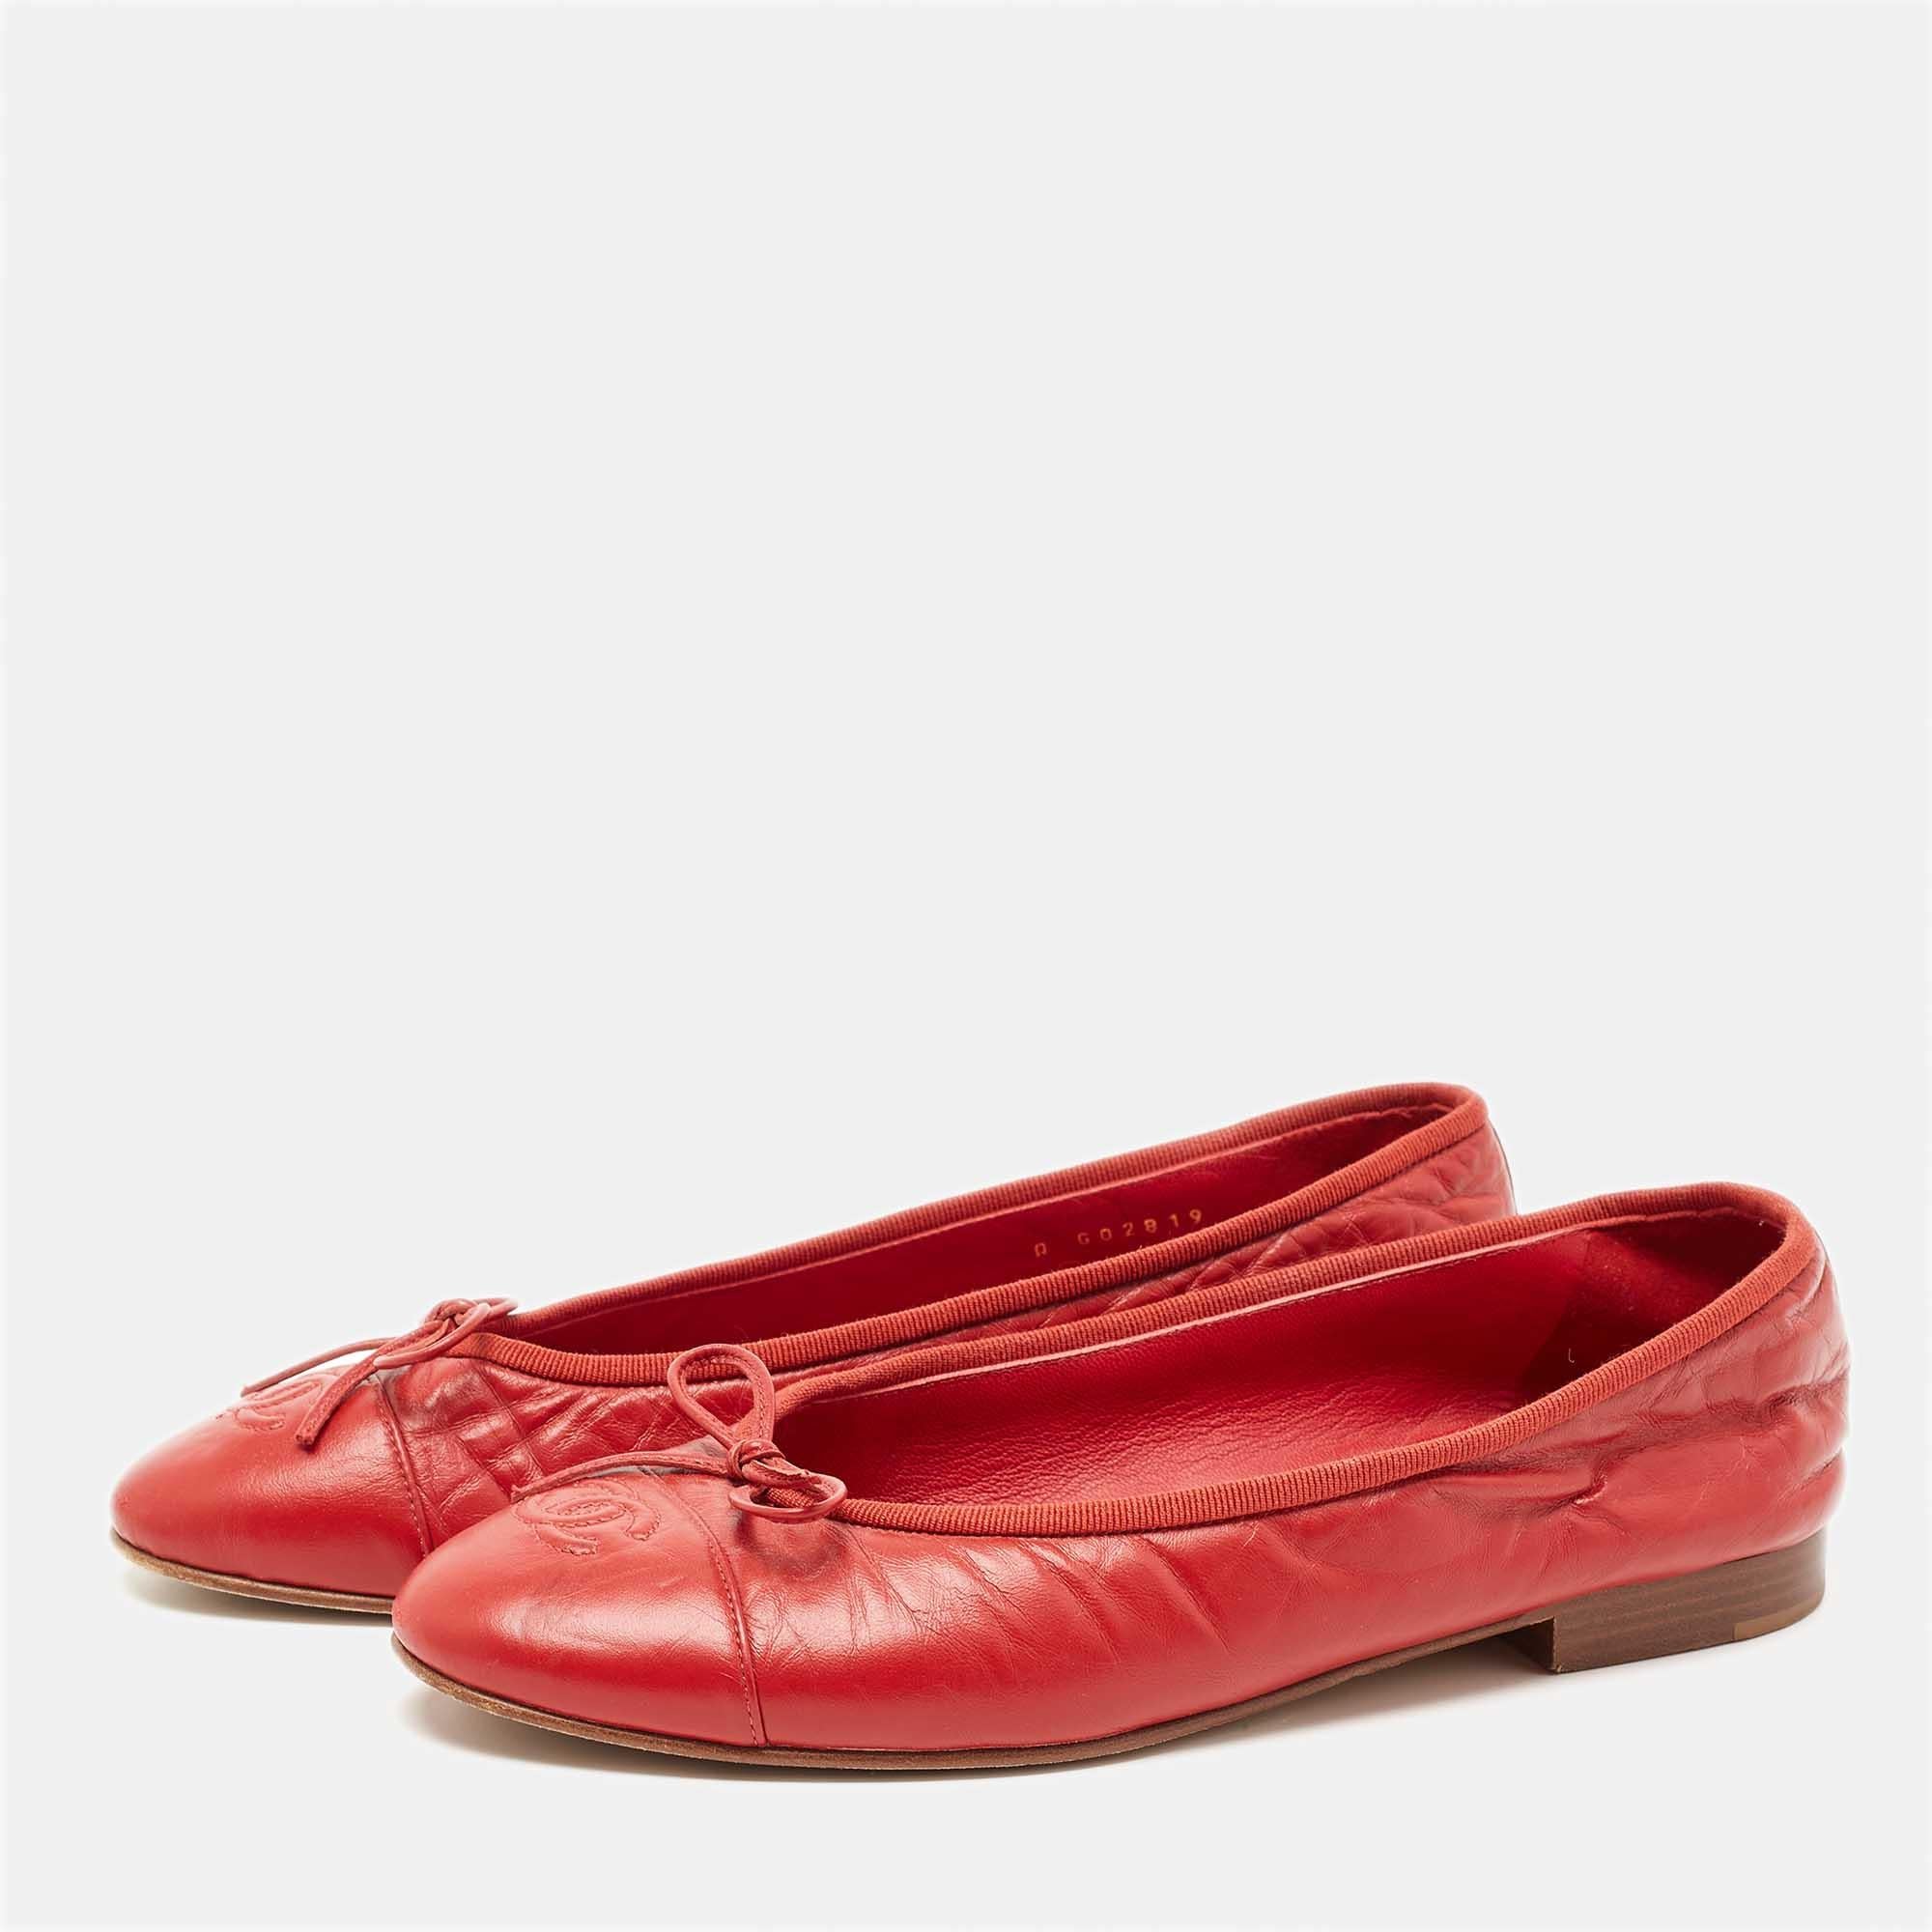 Complete your look by adding these Chanel red ballet flats to your collection of everyday footwear. They are crafted skilfully to grant the perfect fit and style.

